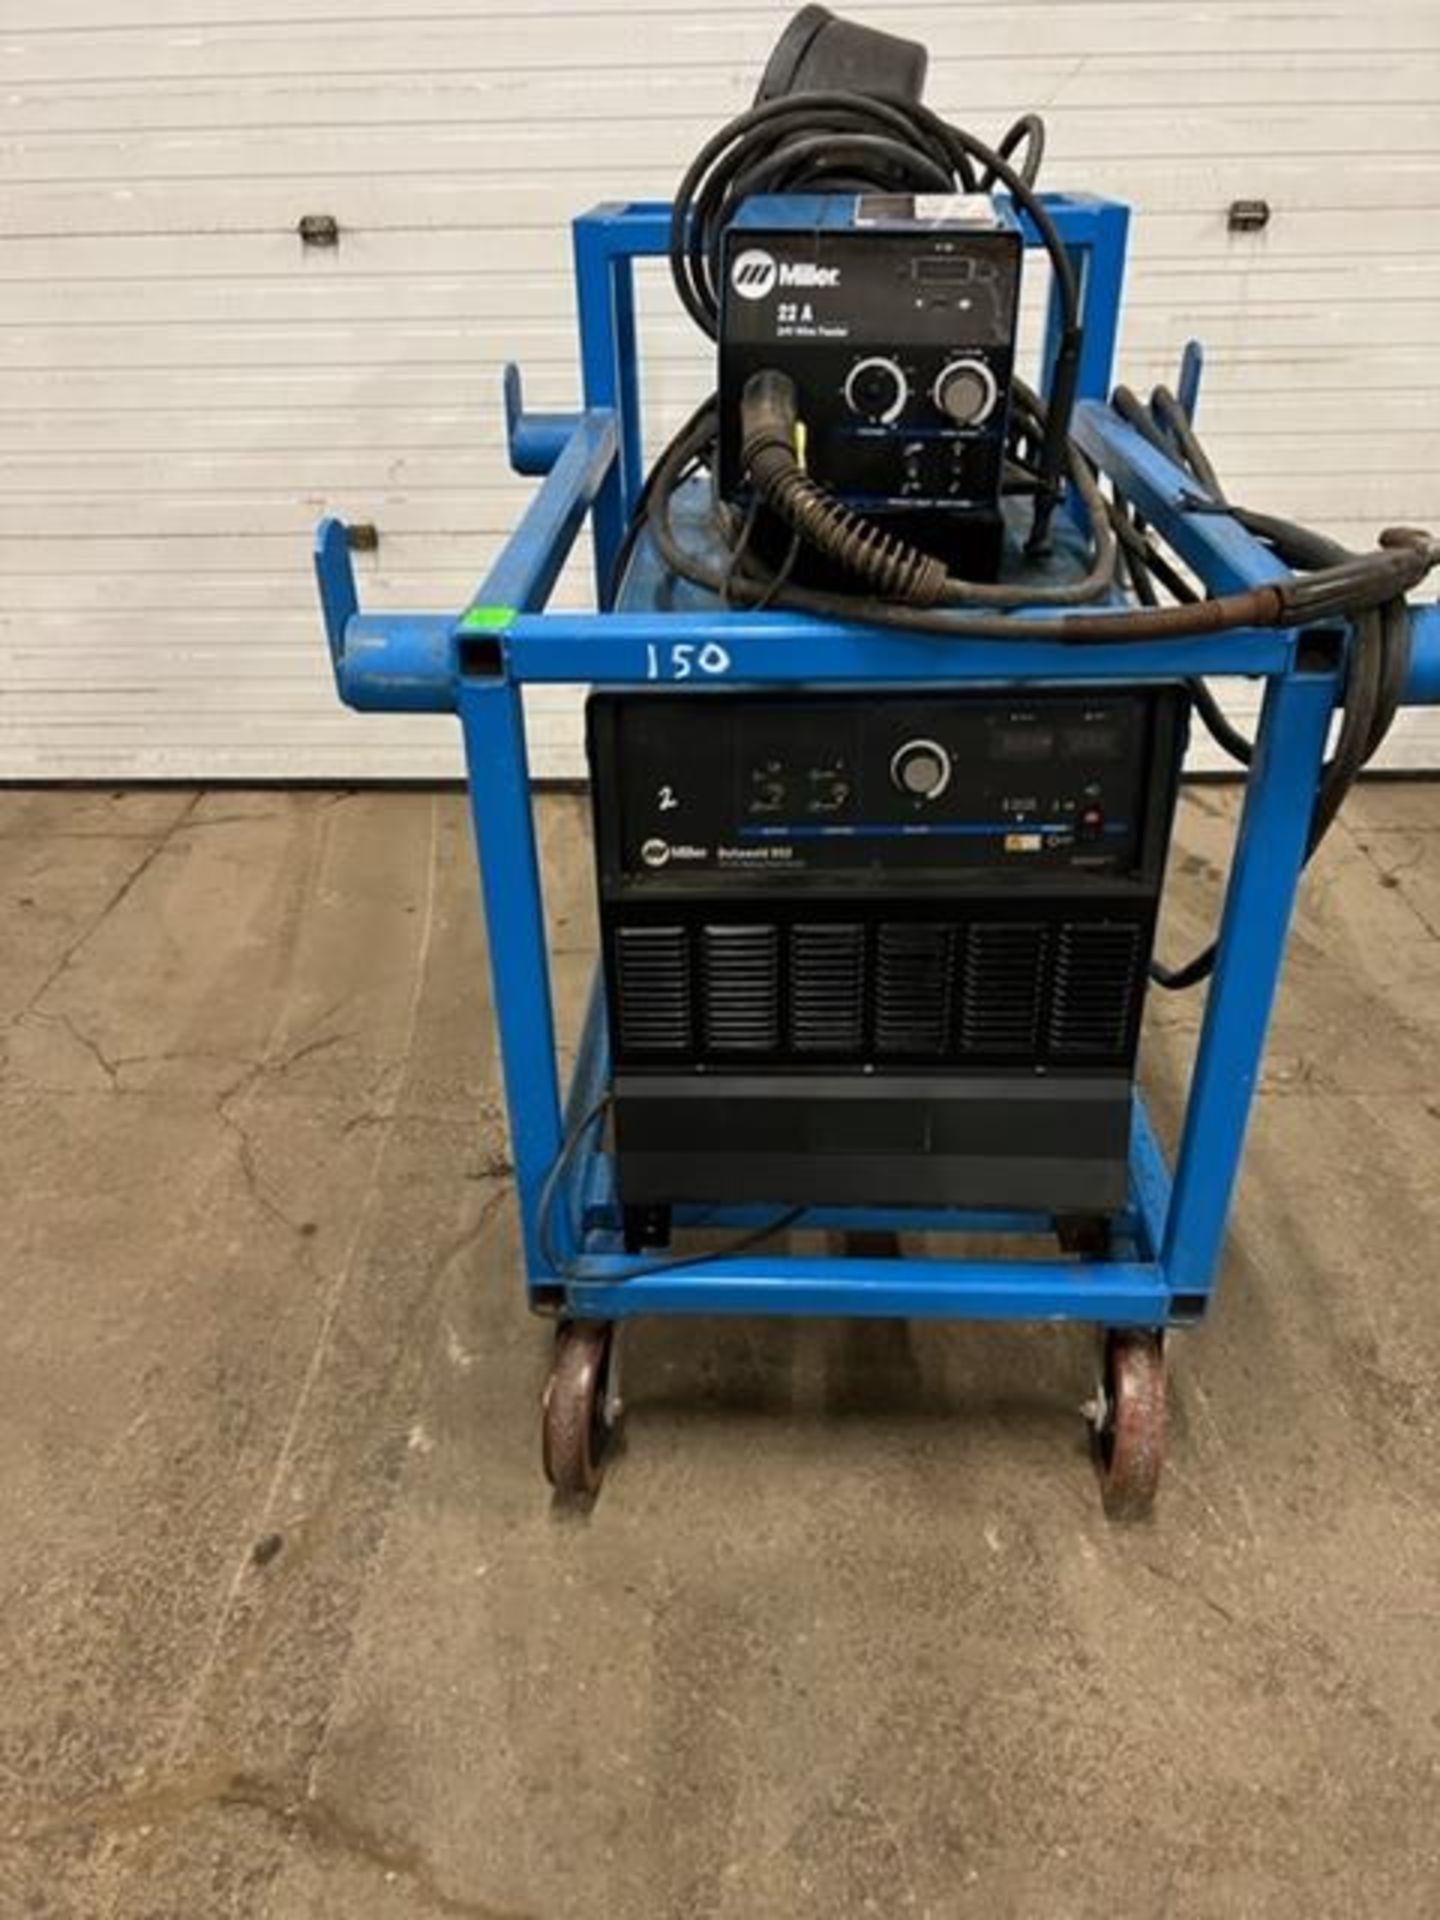 Miller Deltaweld 652 Mig Welder 650 Amp with 22A Wire Feeder COMPLETE with Mig Gun, Cart and cables